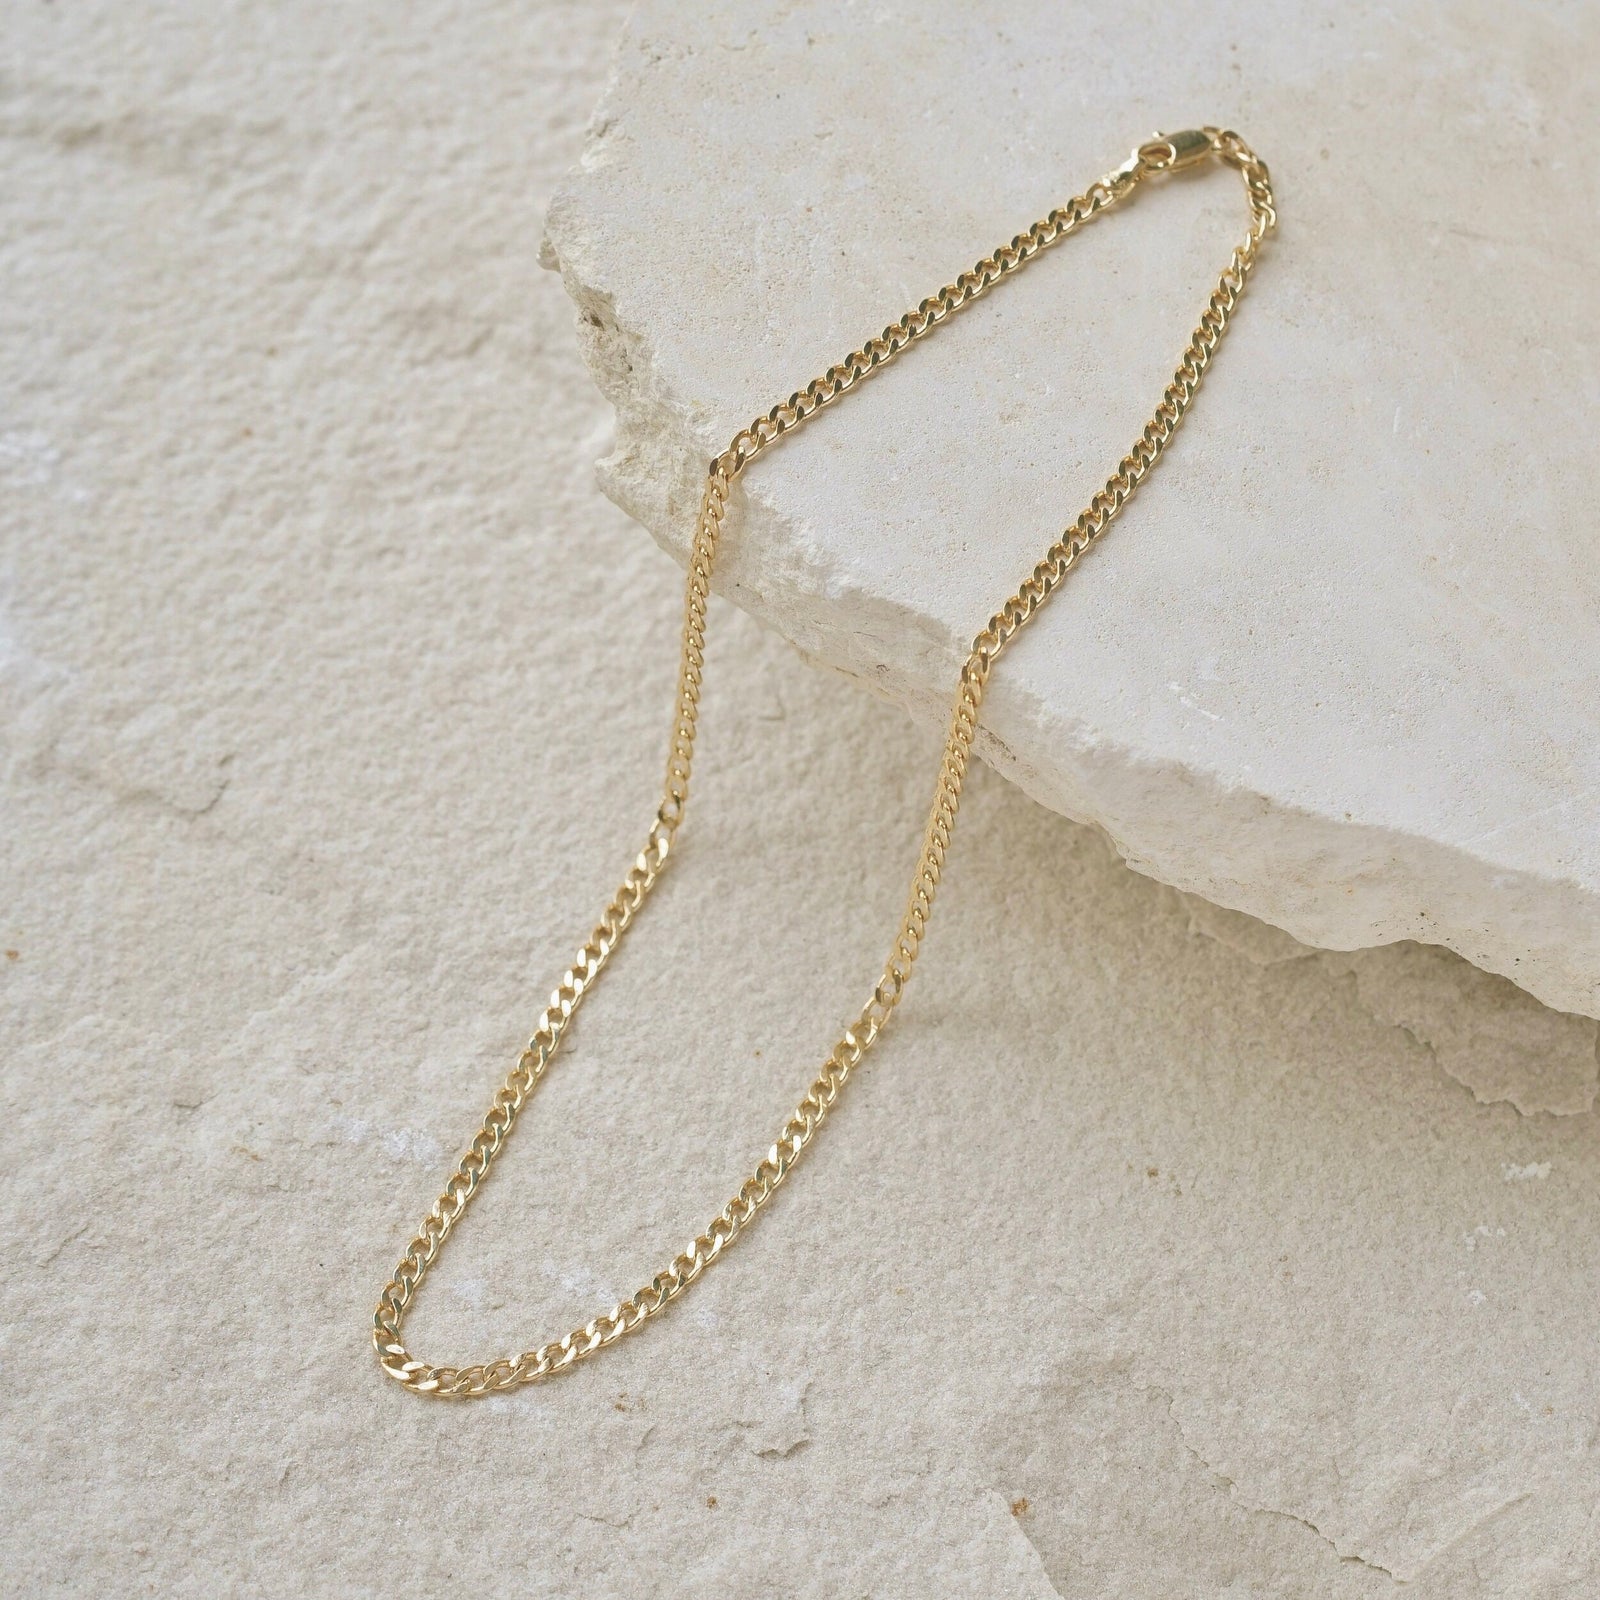 Handmade gold necklace 